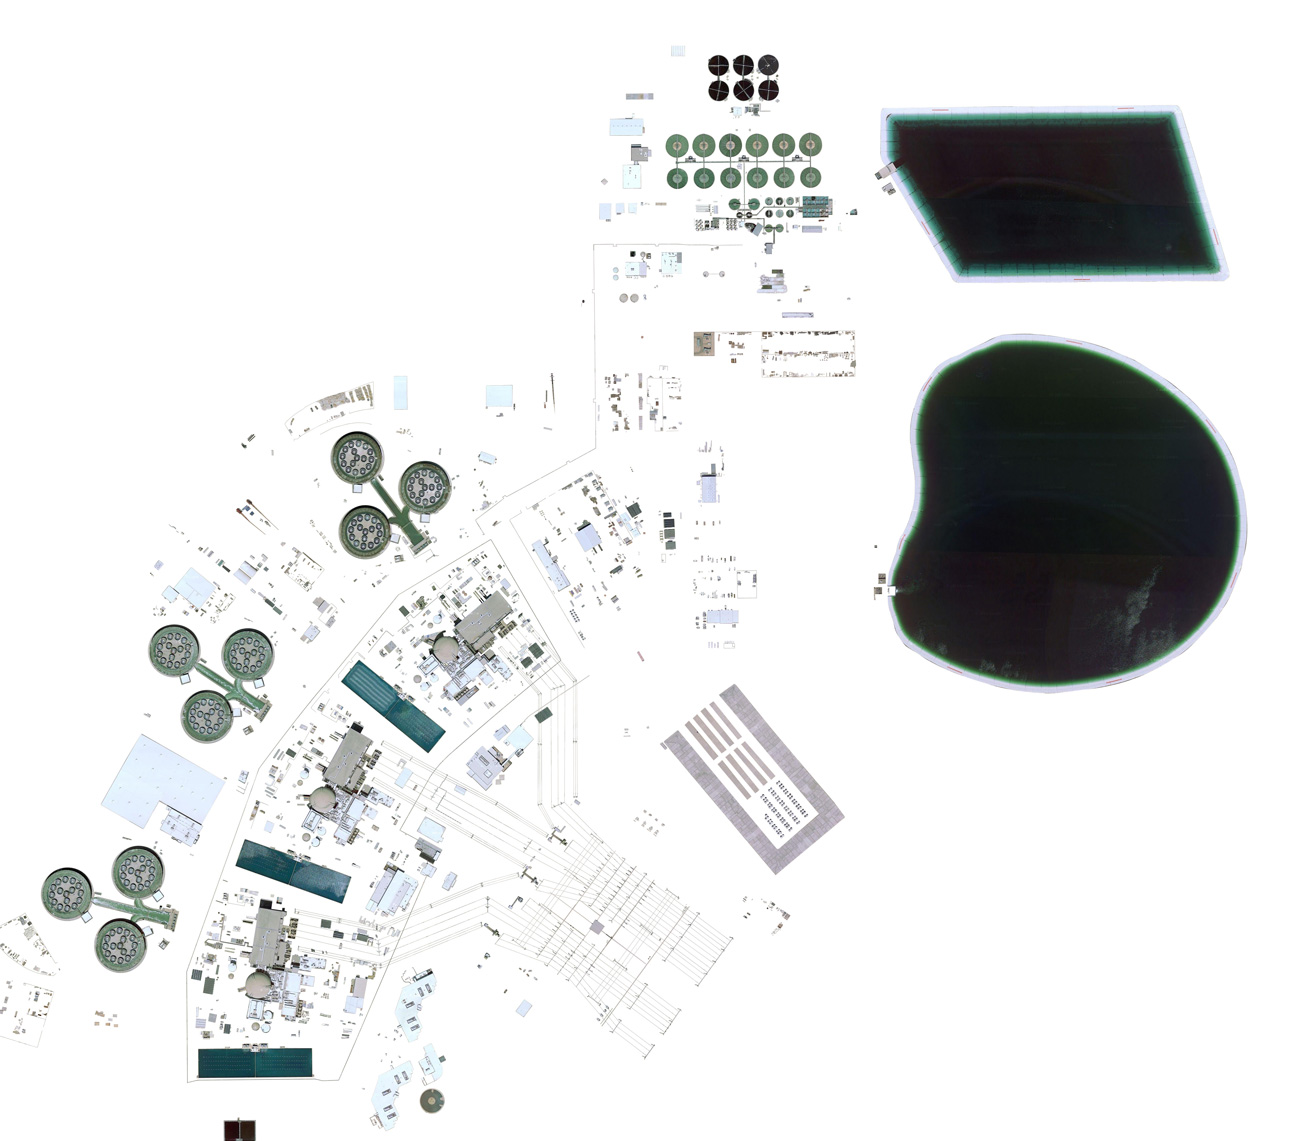 Isolated satellite imagery of a nuclear plant, with buildings, pipes, and a large waste pond